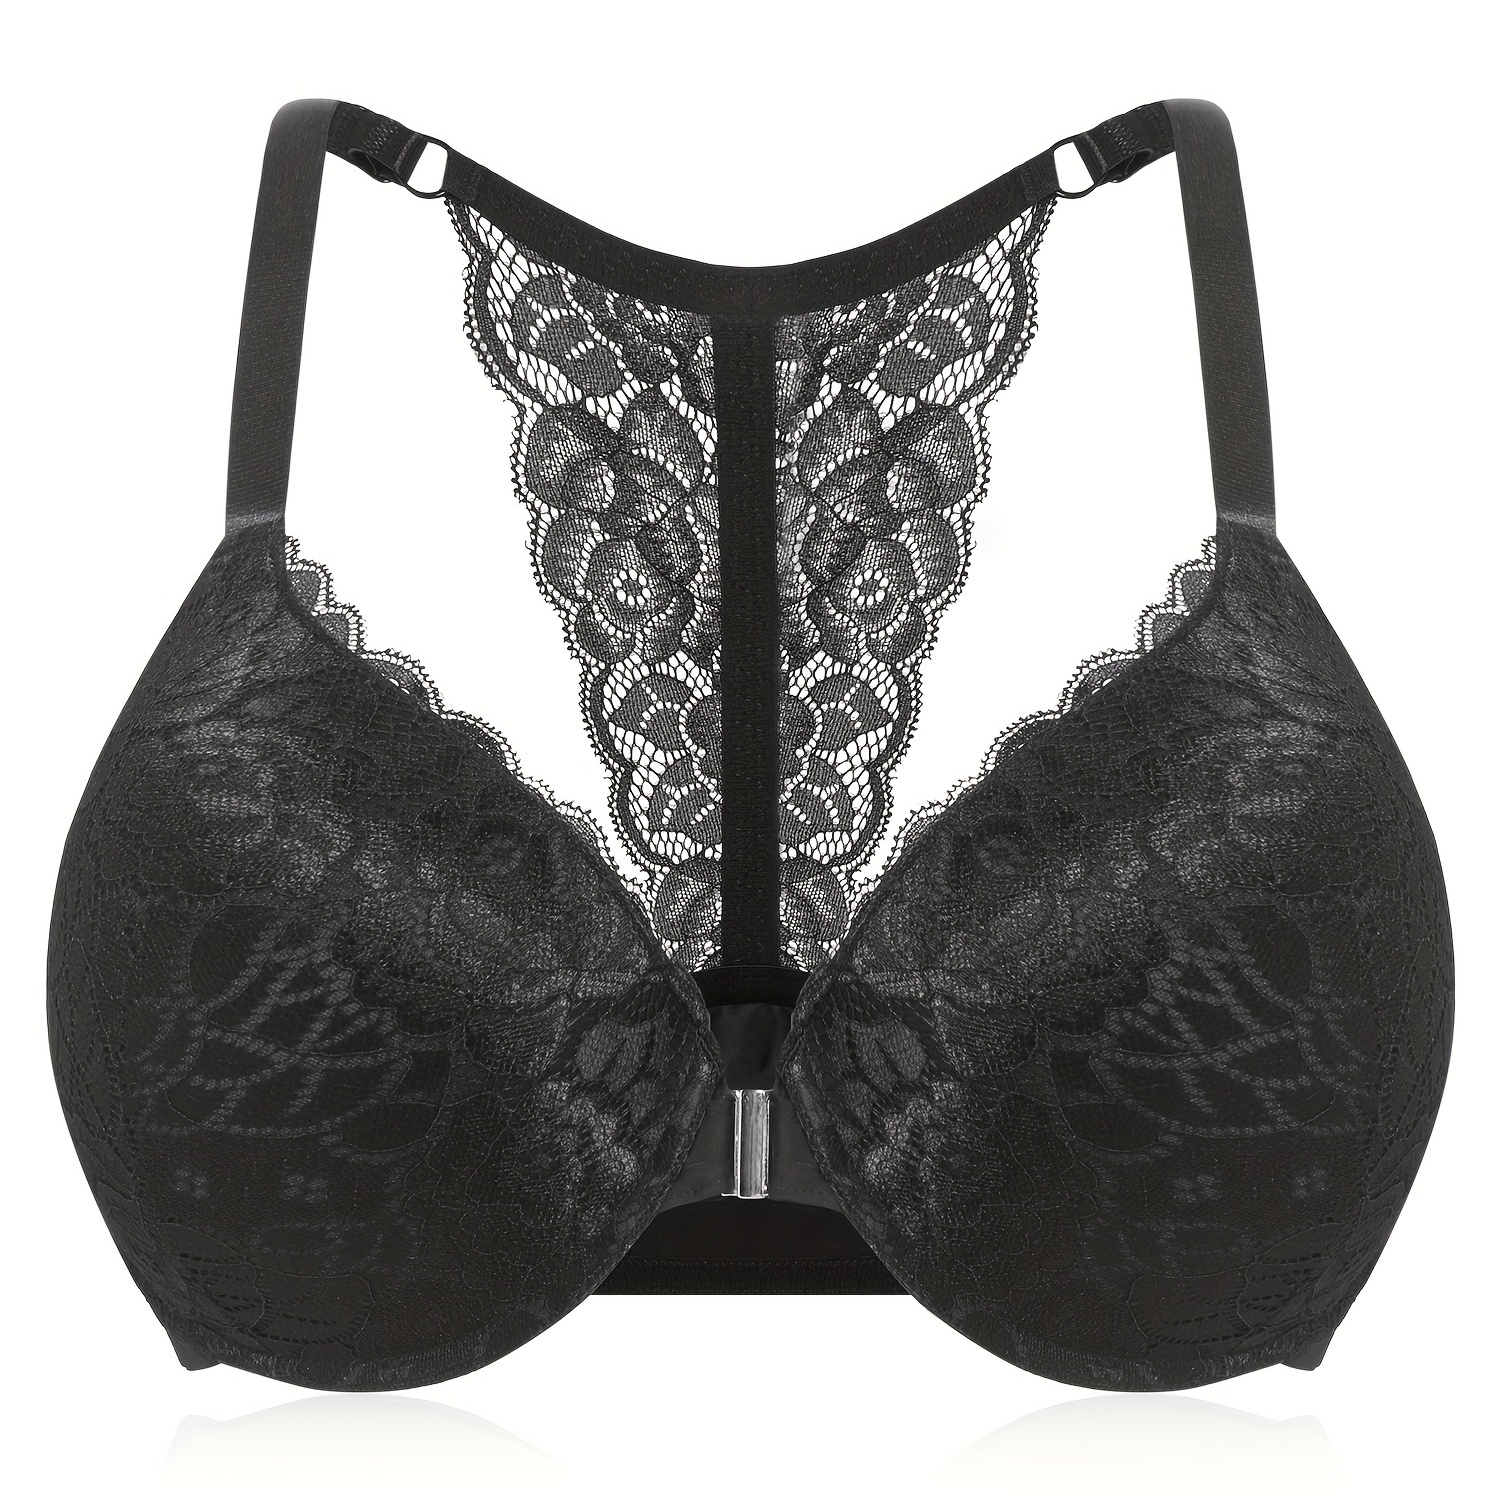 

Women's Music Festival Sexy Bra, Plus Size Floral Lace Lightly Lined Racer Back Front Closure Underwire T-shirt Bra